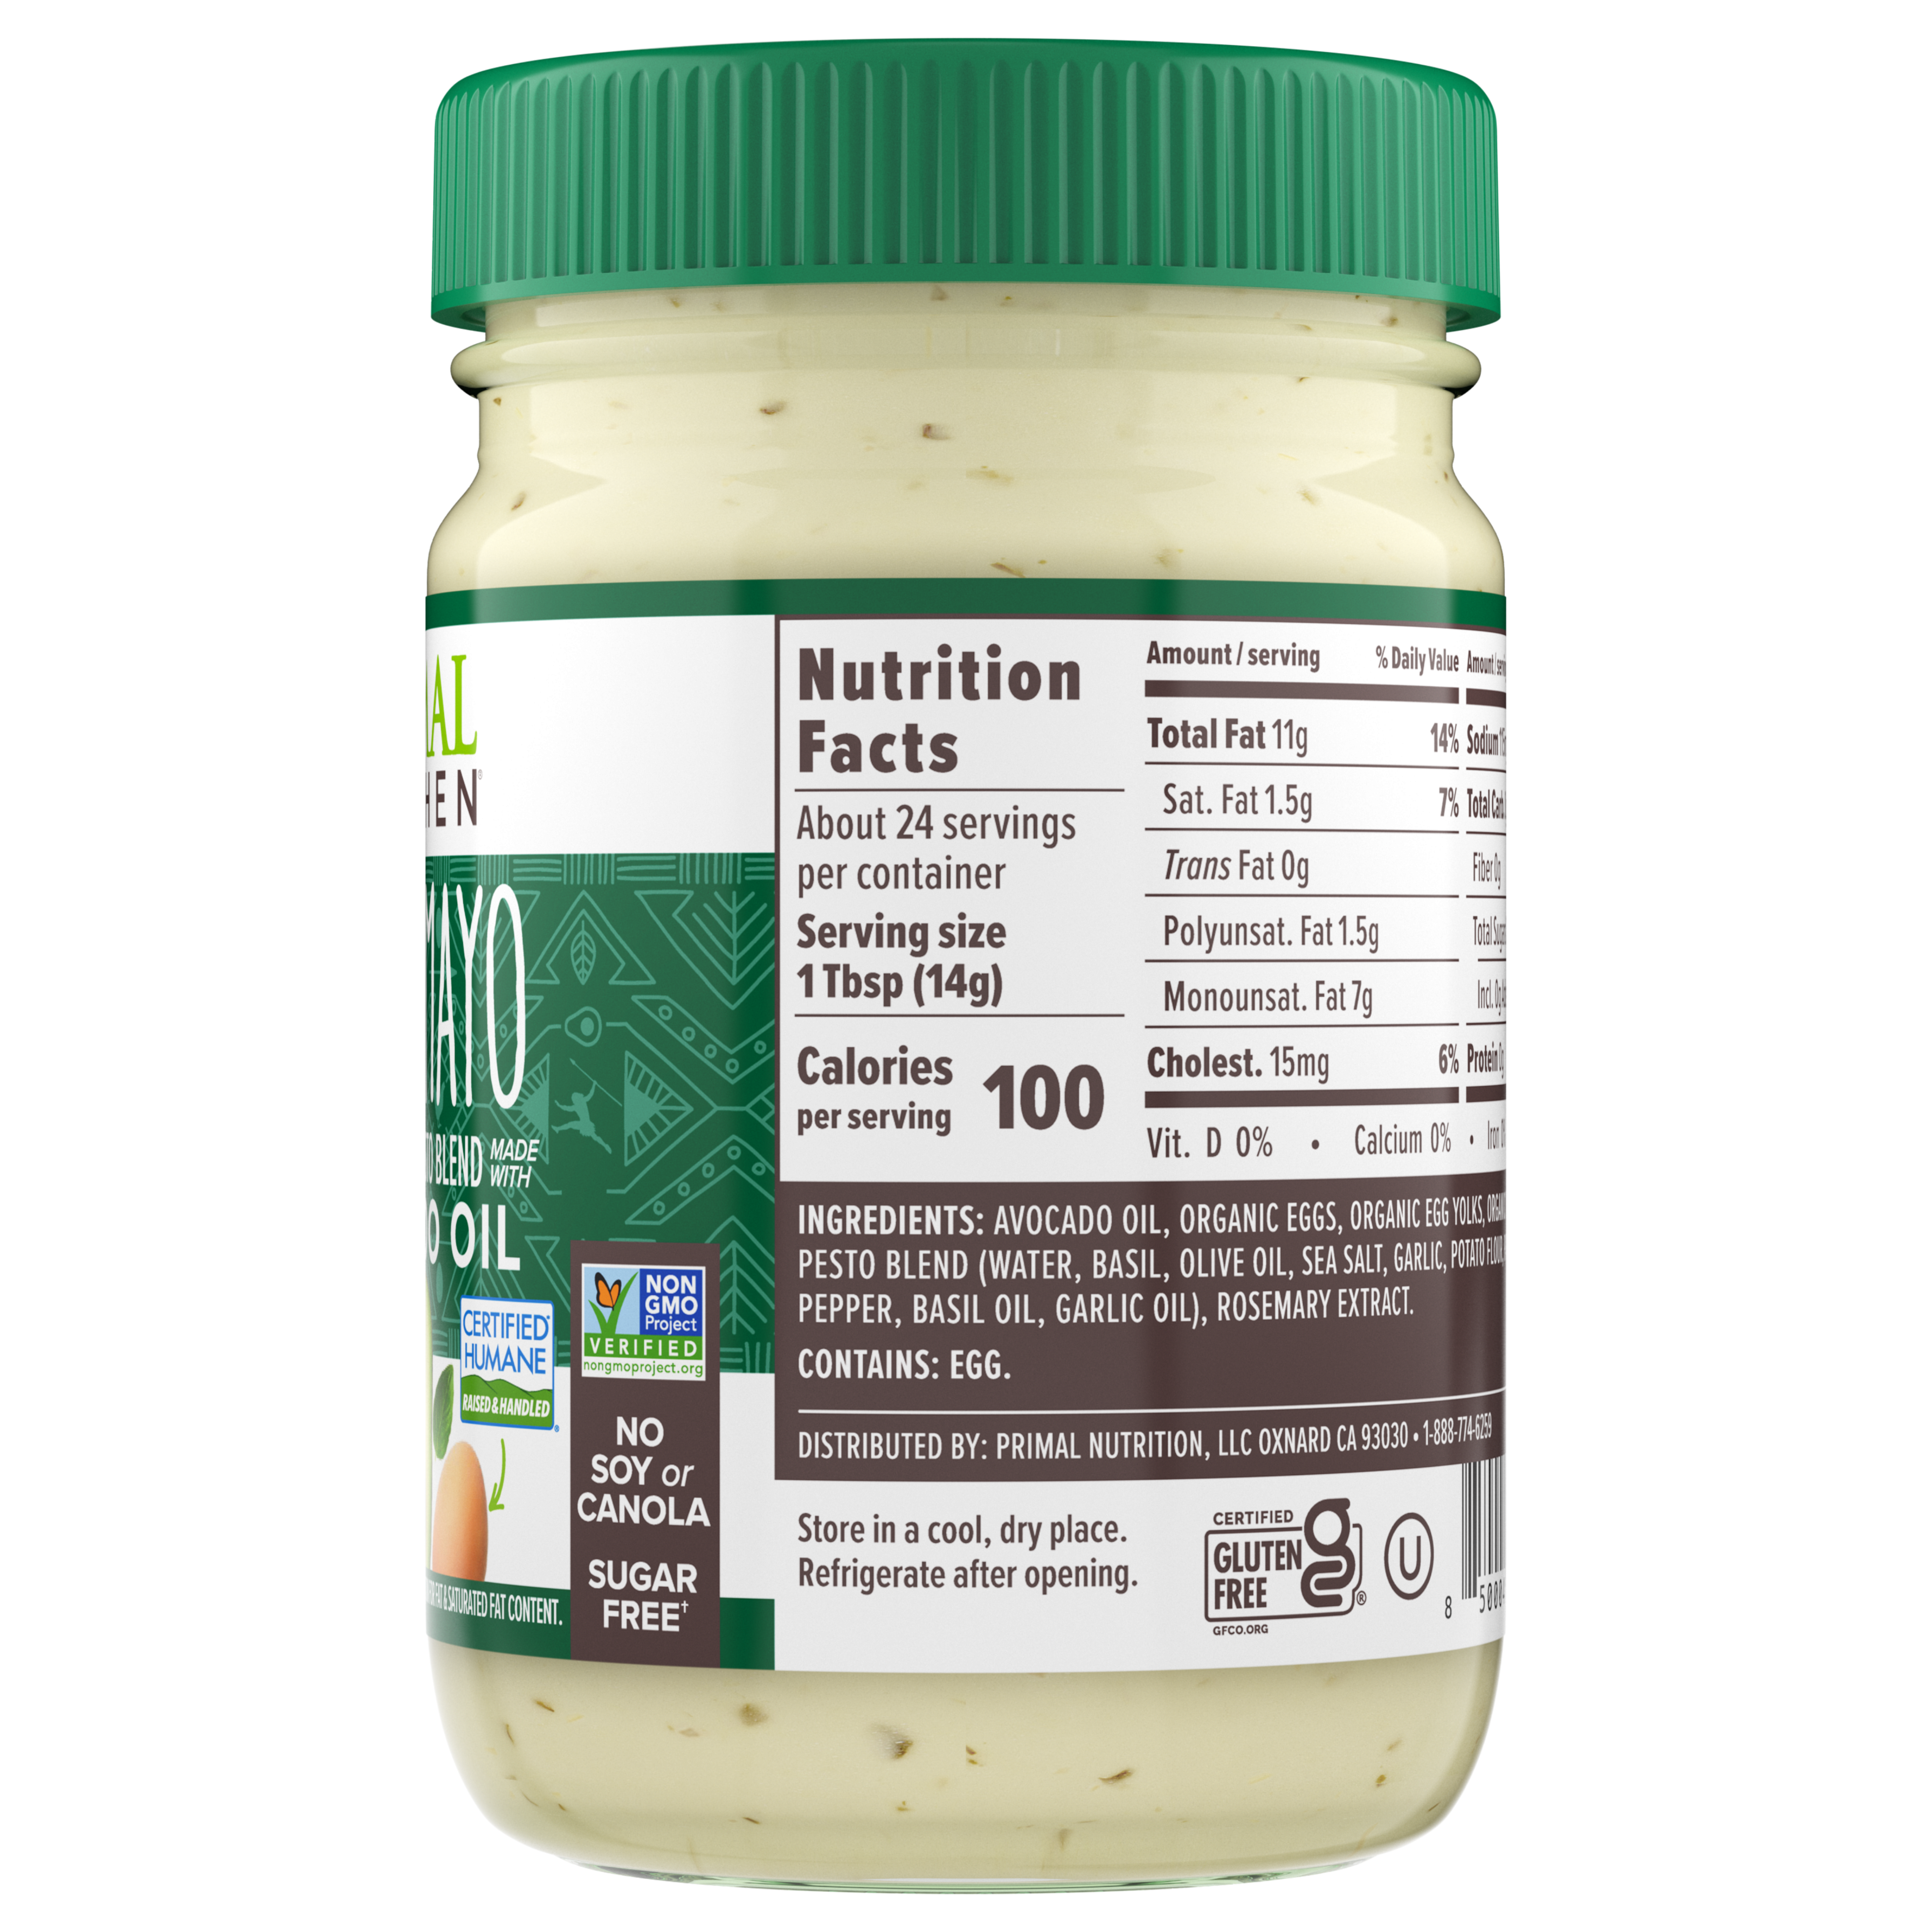 Nutrition label of a glass jar with a green lid of Primal Kitchen Pesto Mayo made with Avocado Oil.